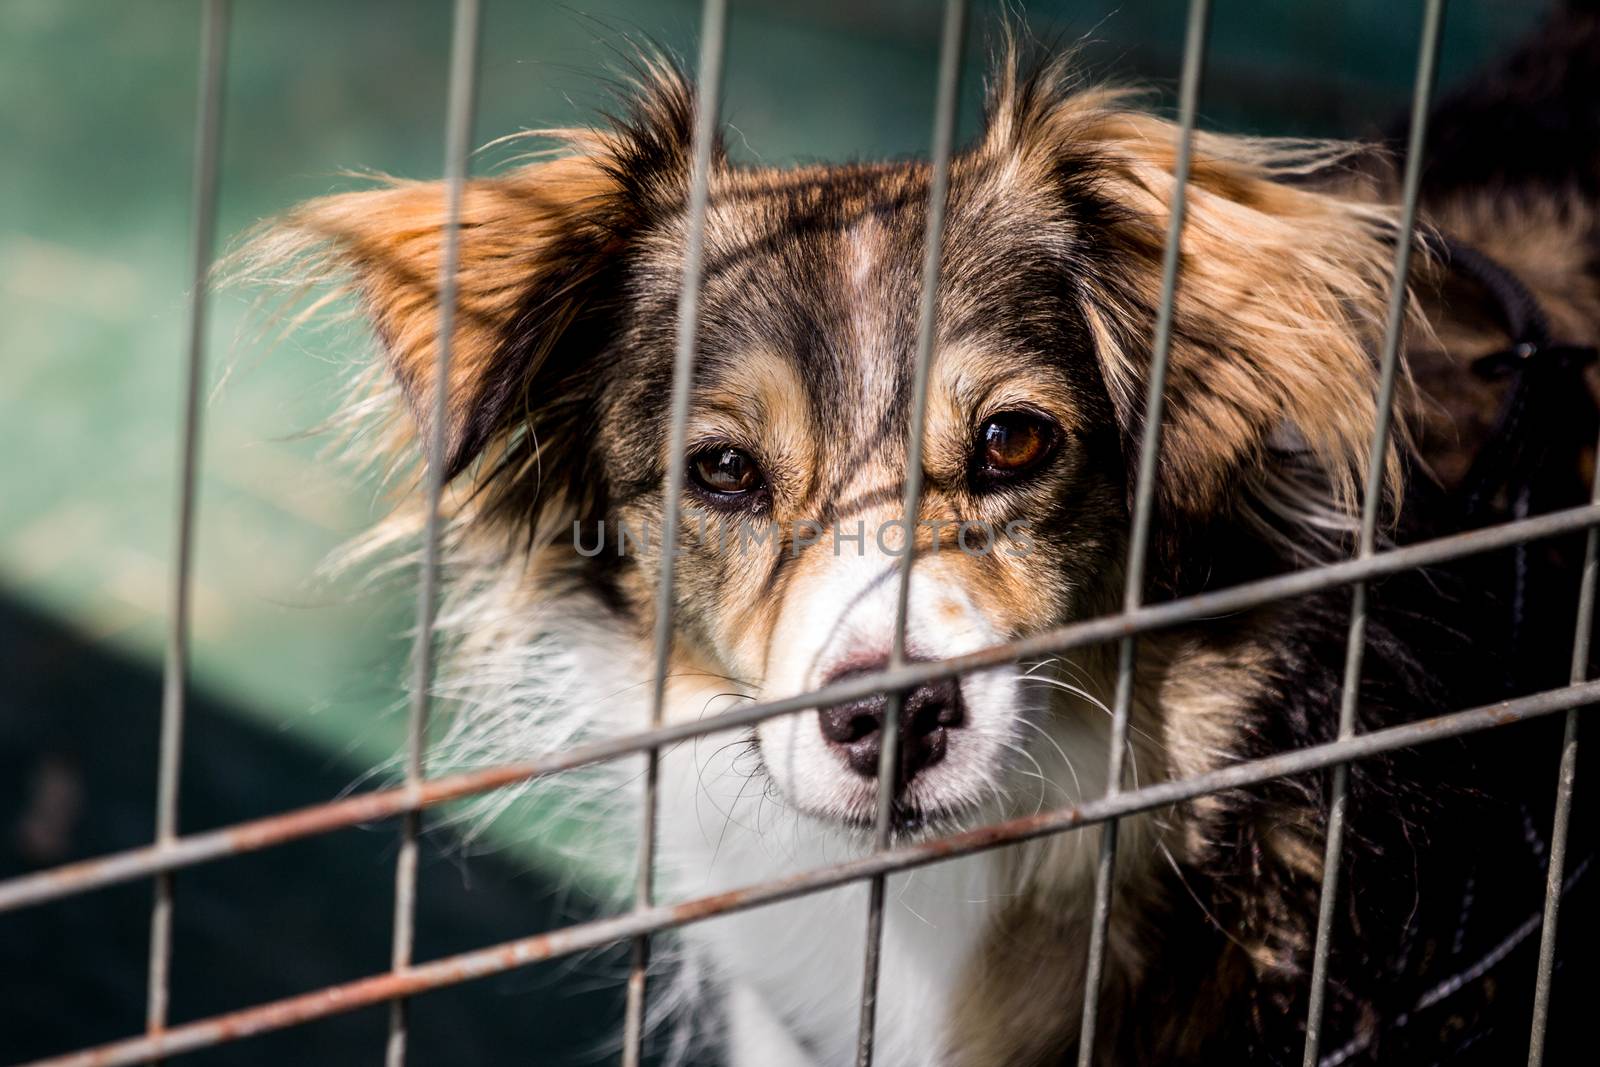 Dog behind bars - abandoned waiting for a home